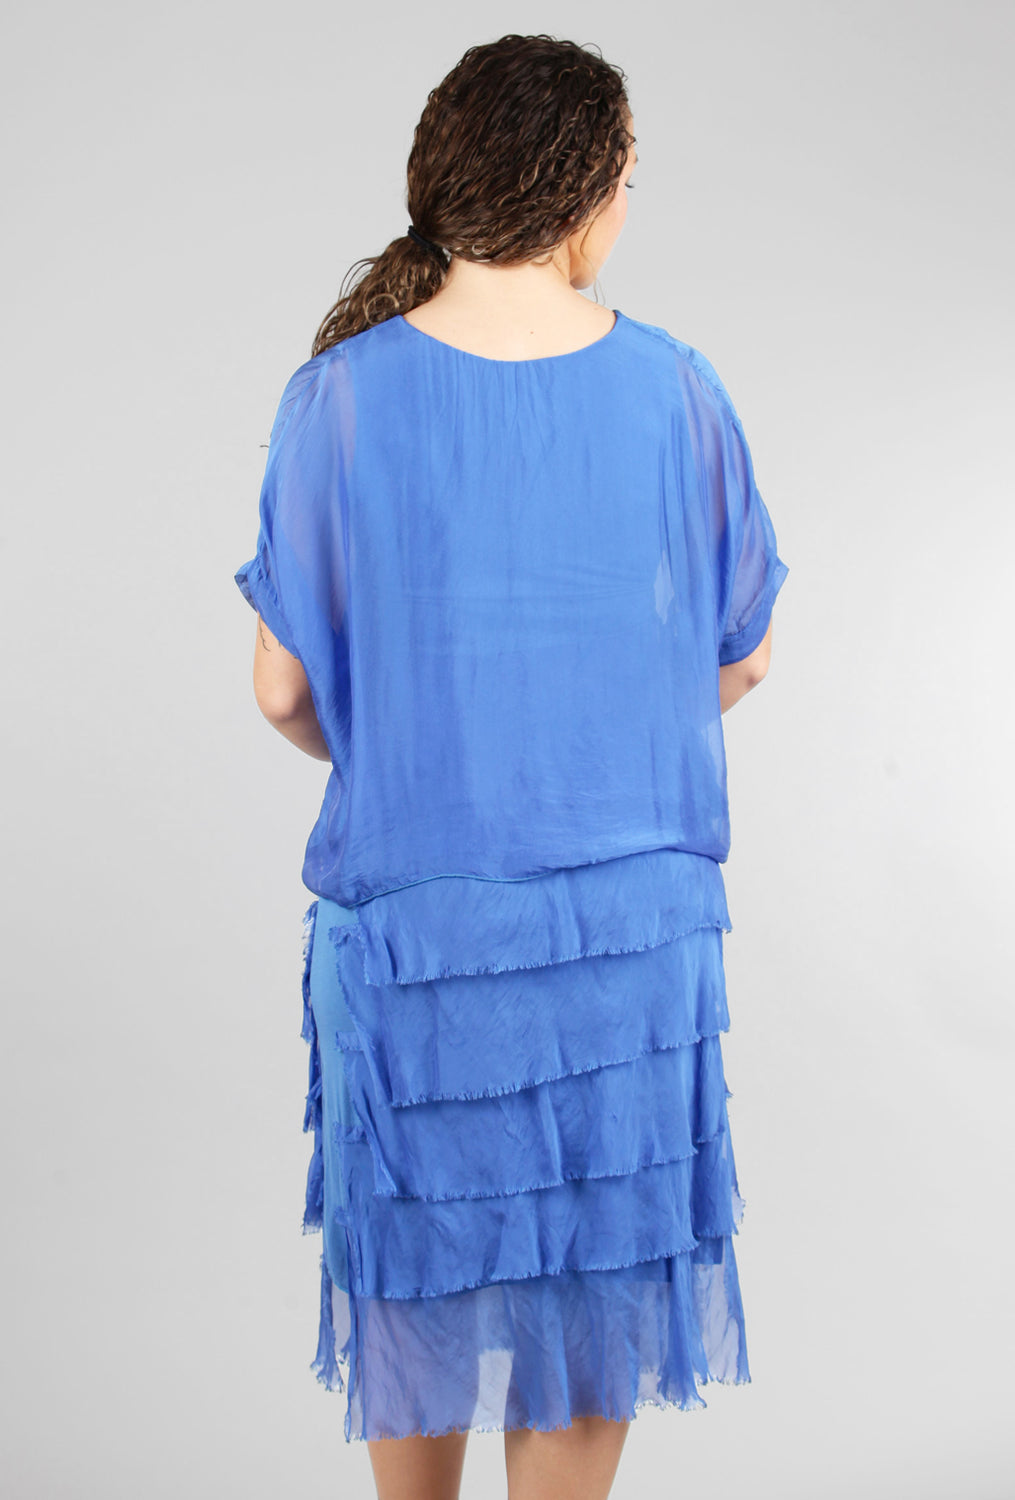 Sleeved Tattered Tiers Dress, Royal Blue